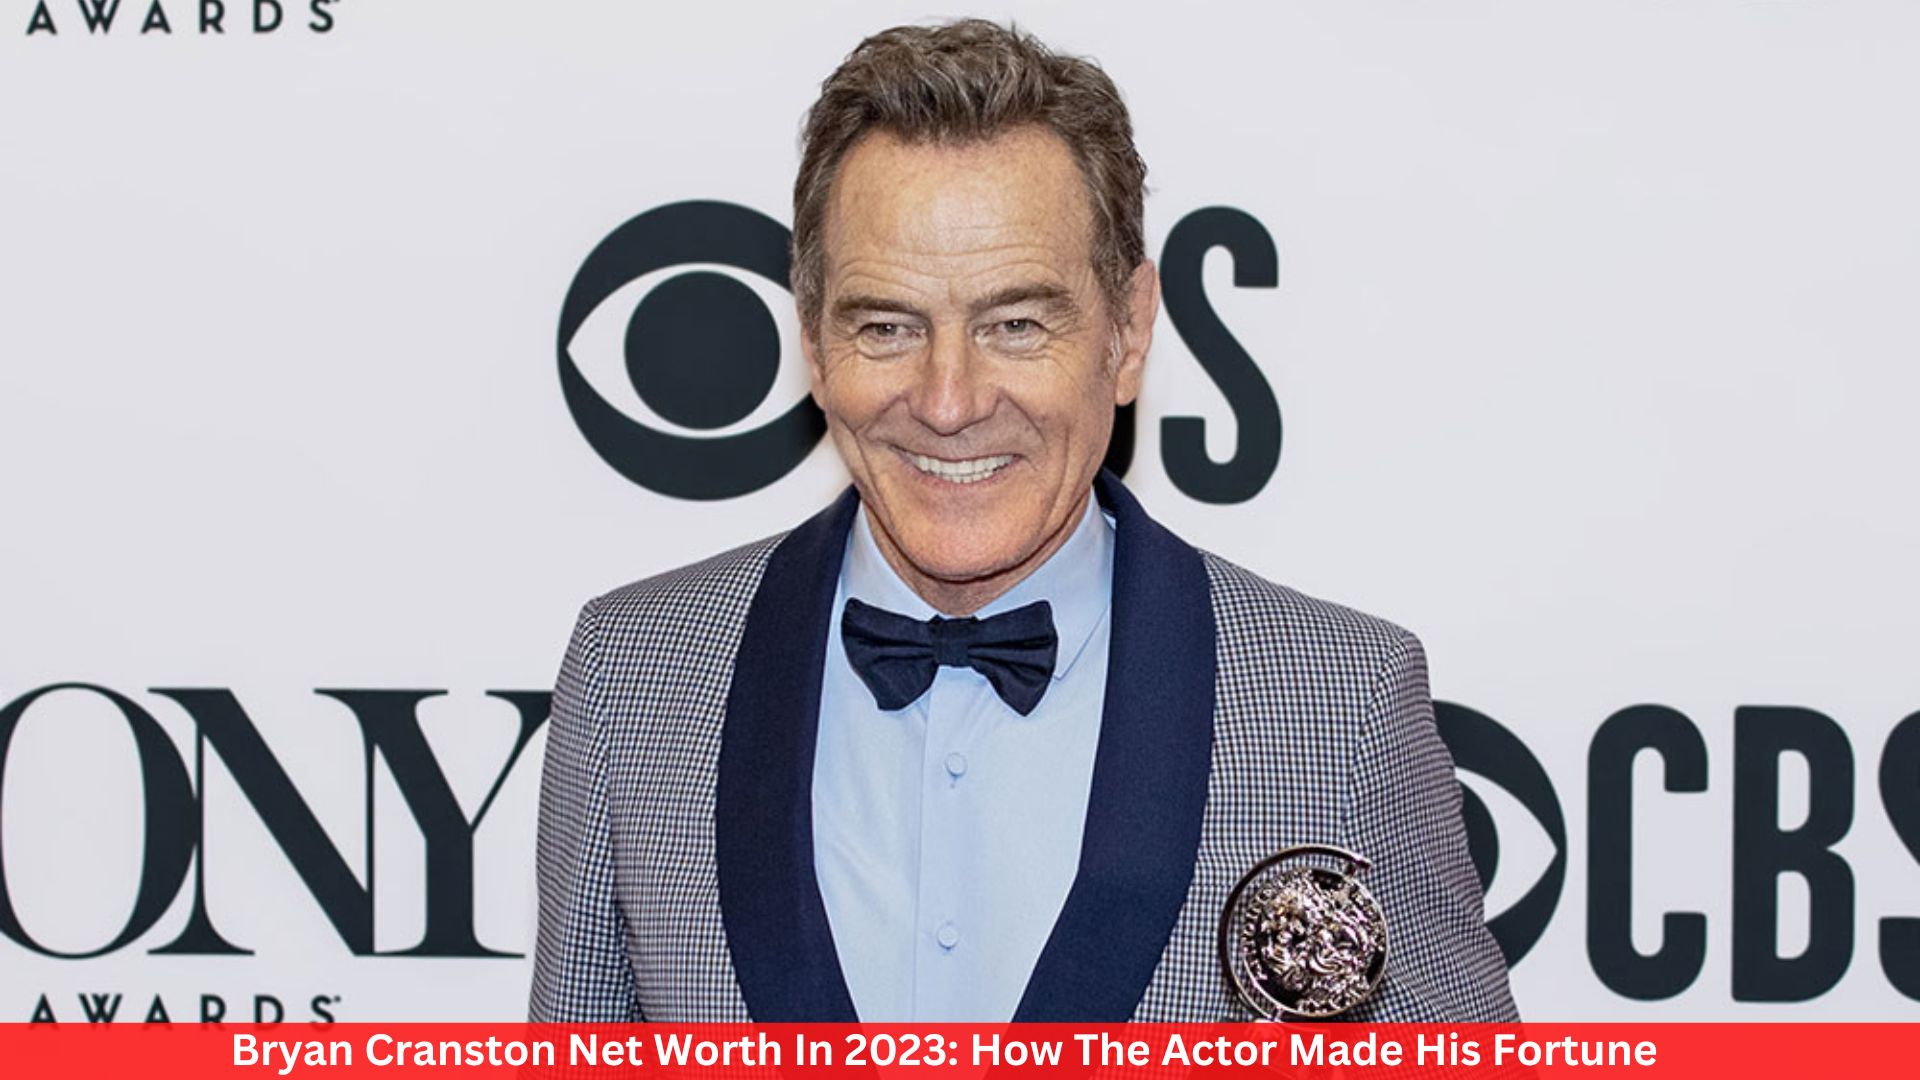 Bryan Cranston Net Worth In 2023: How The Actor Made His Fortune